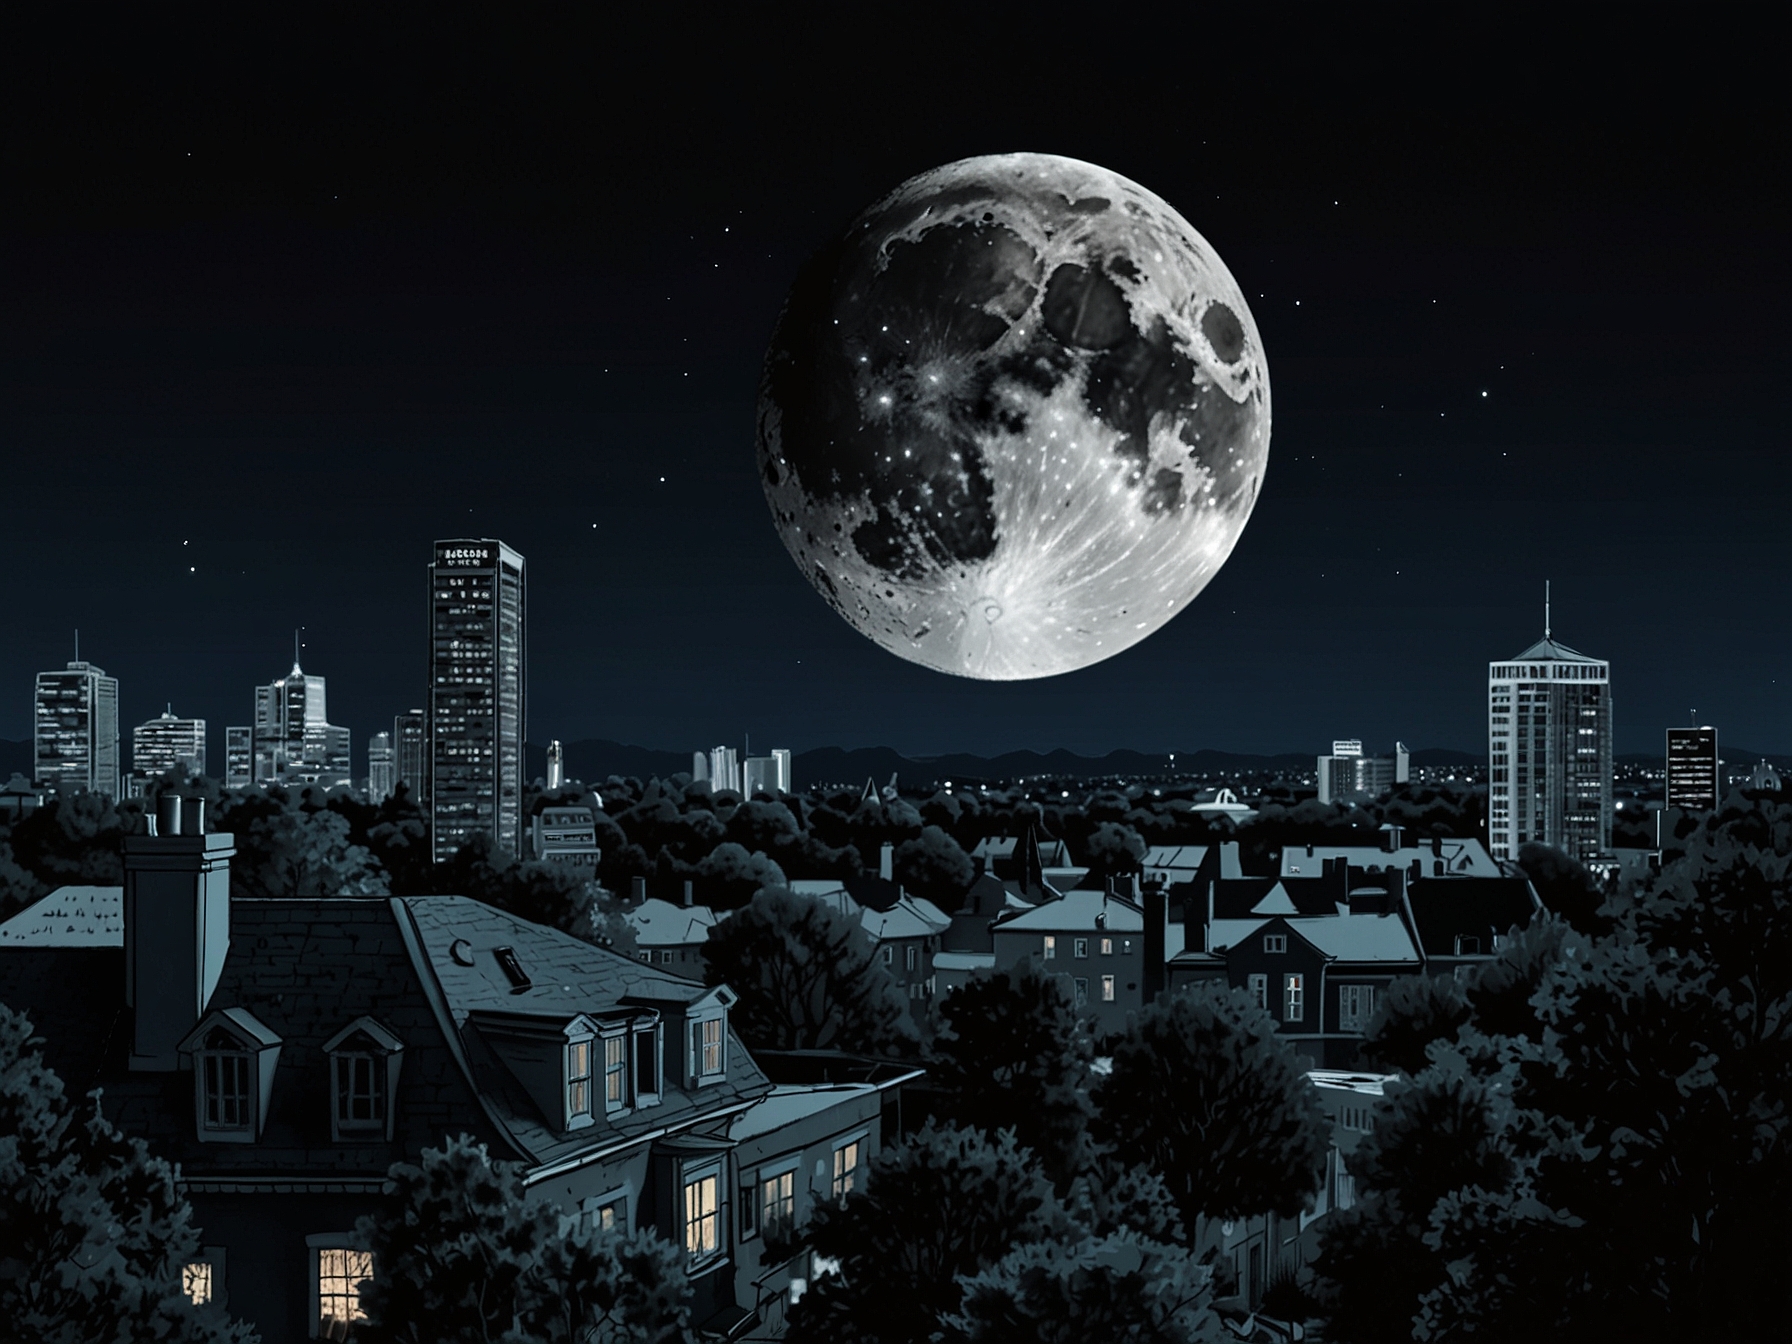 An image capturing the strawberry full moon in all its glory, appearing larger than usual due to the moon illusion, with a picturesque horizon of trees and buildings.